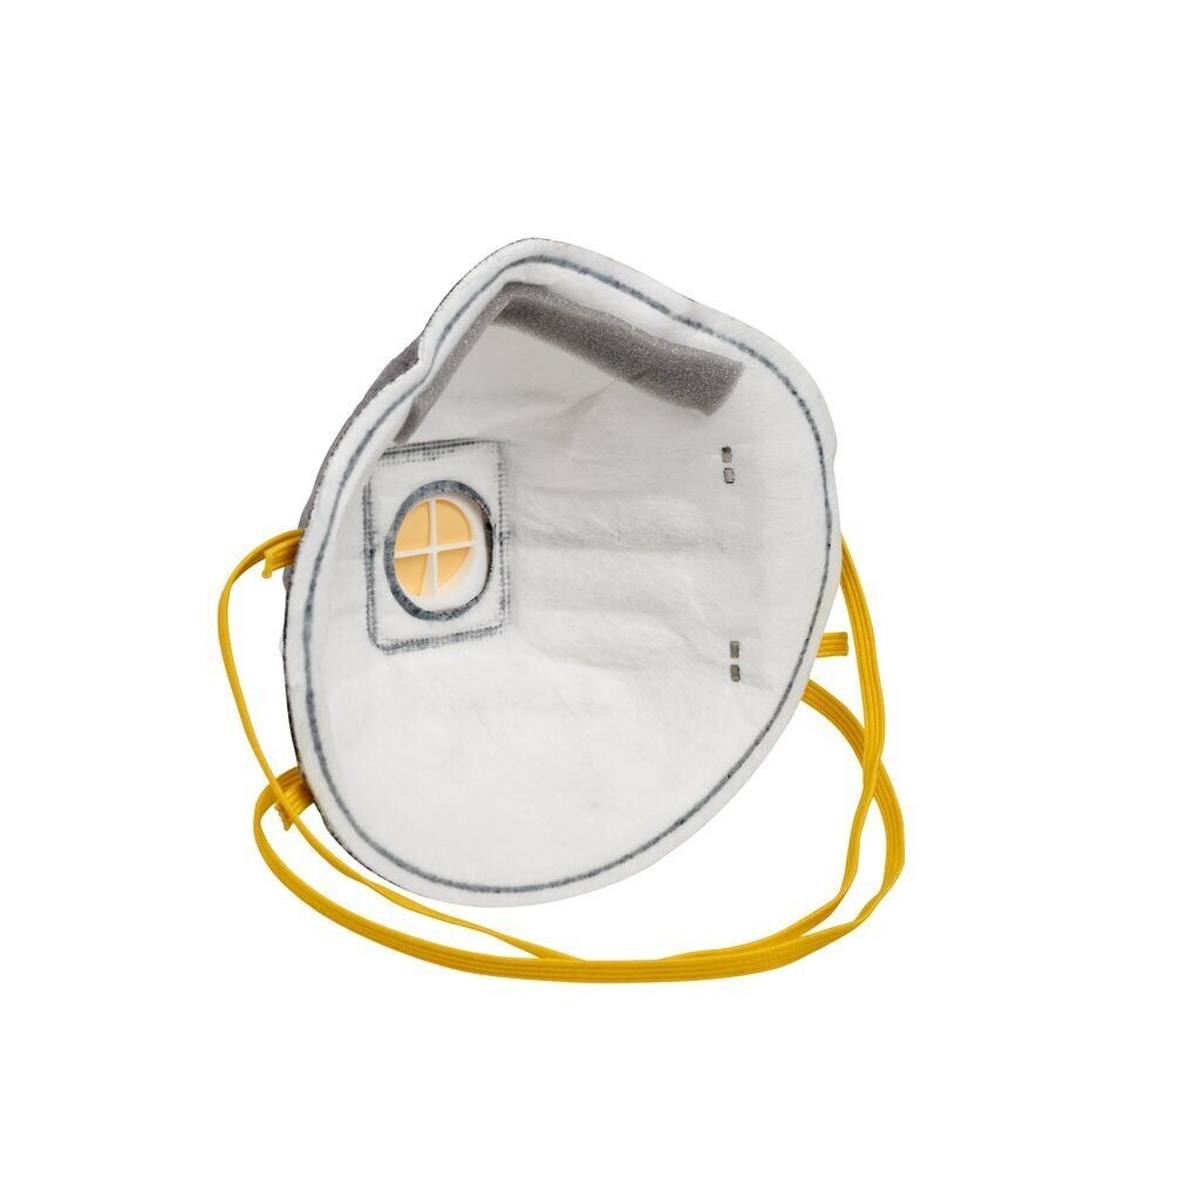 3M 9914 Odor protection mask FFP1 with cool-flow exhalation valve, up to 4 times the limit value and against organic odors below the limit value